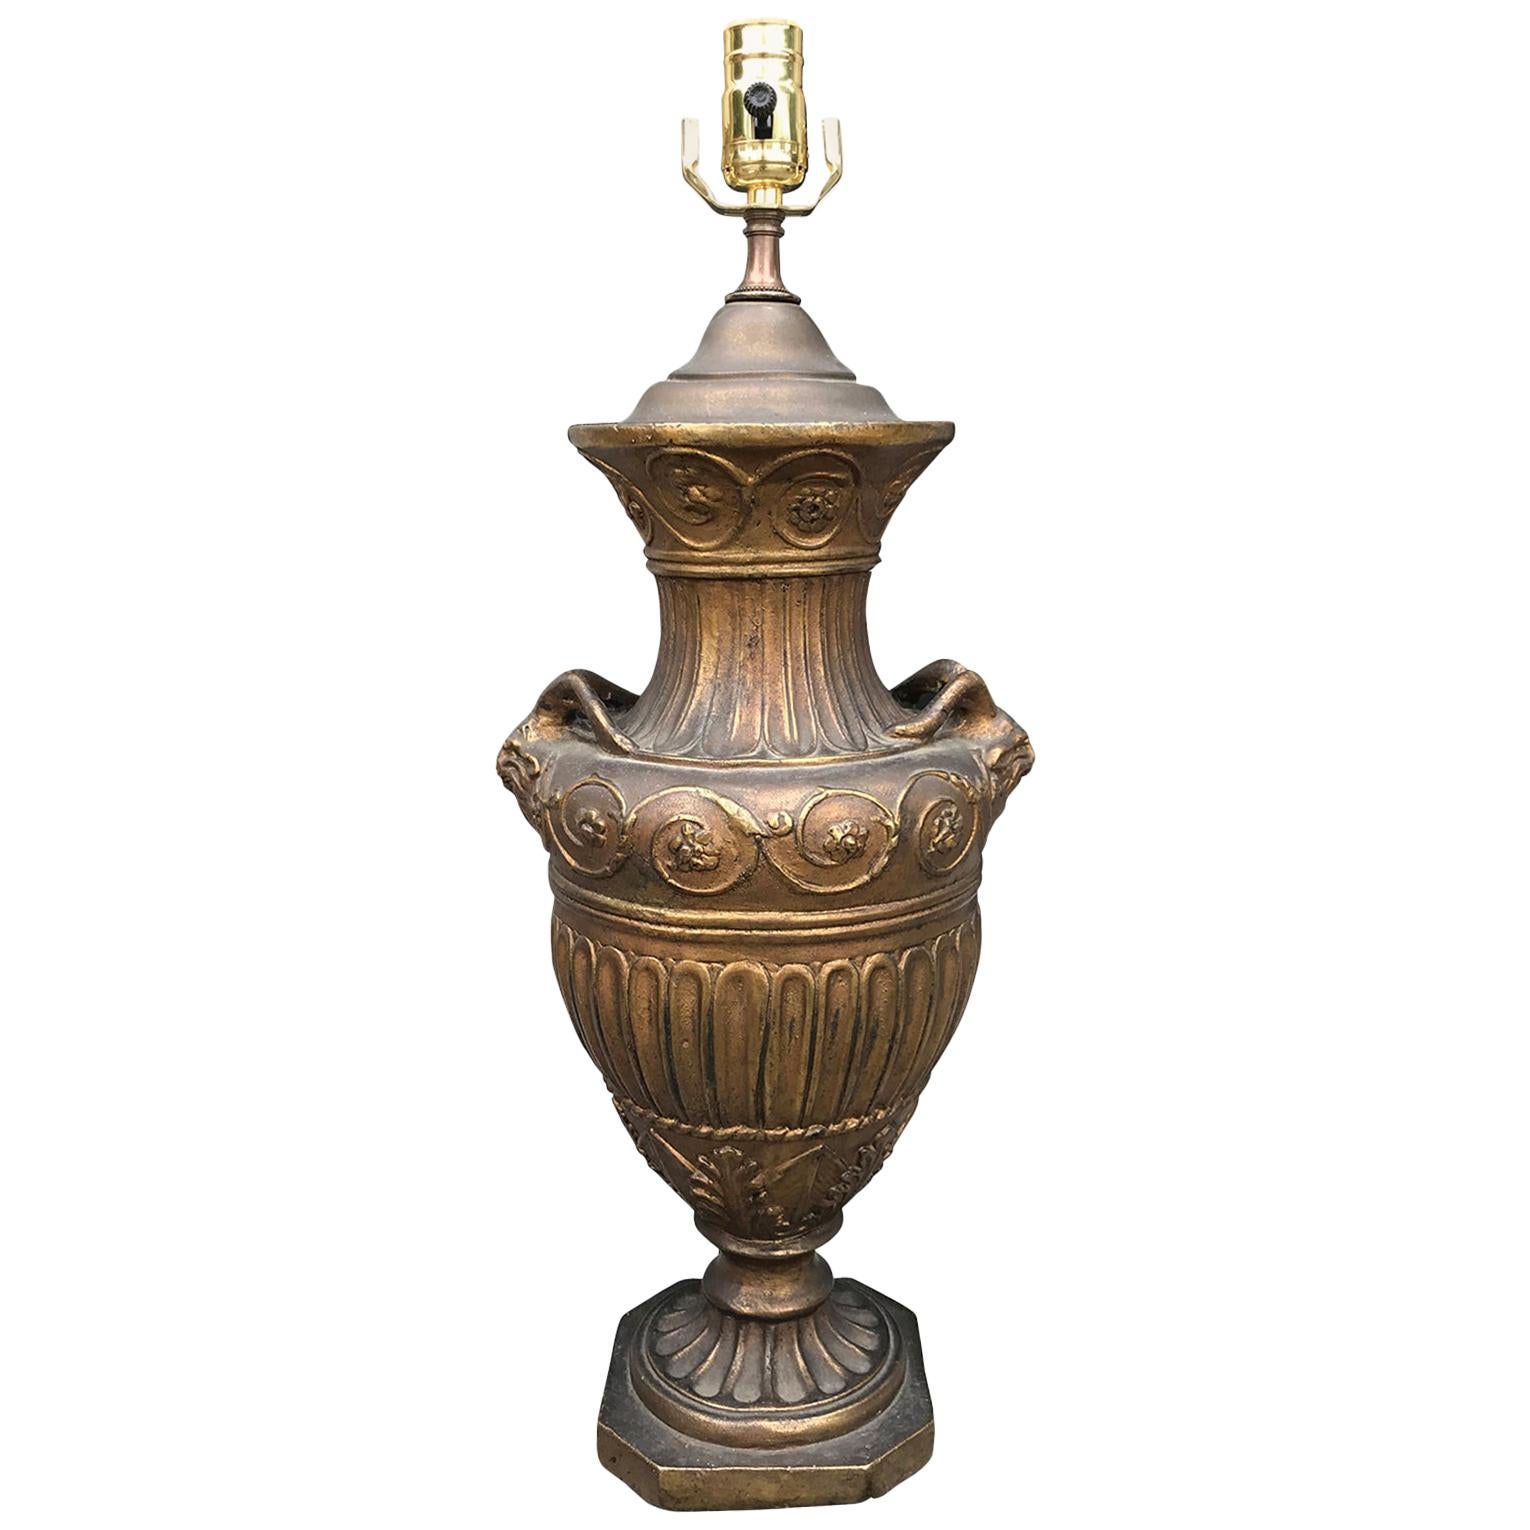 Early 20th Century Neoclassical Gilt Repousee Urn Lamp For Sale